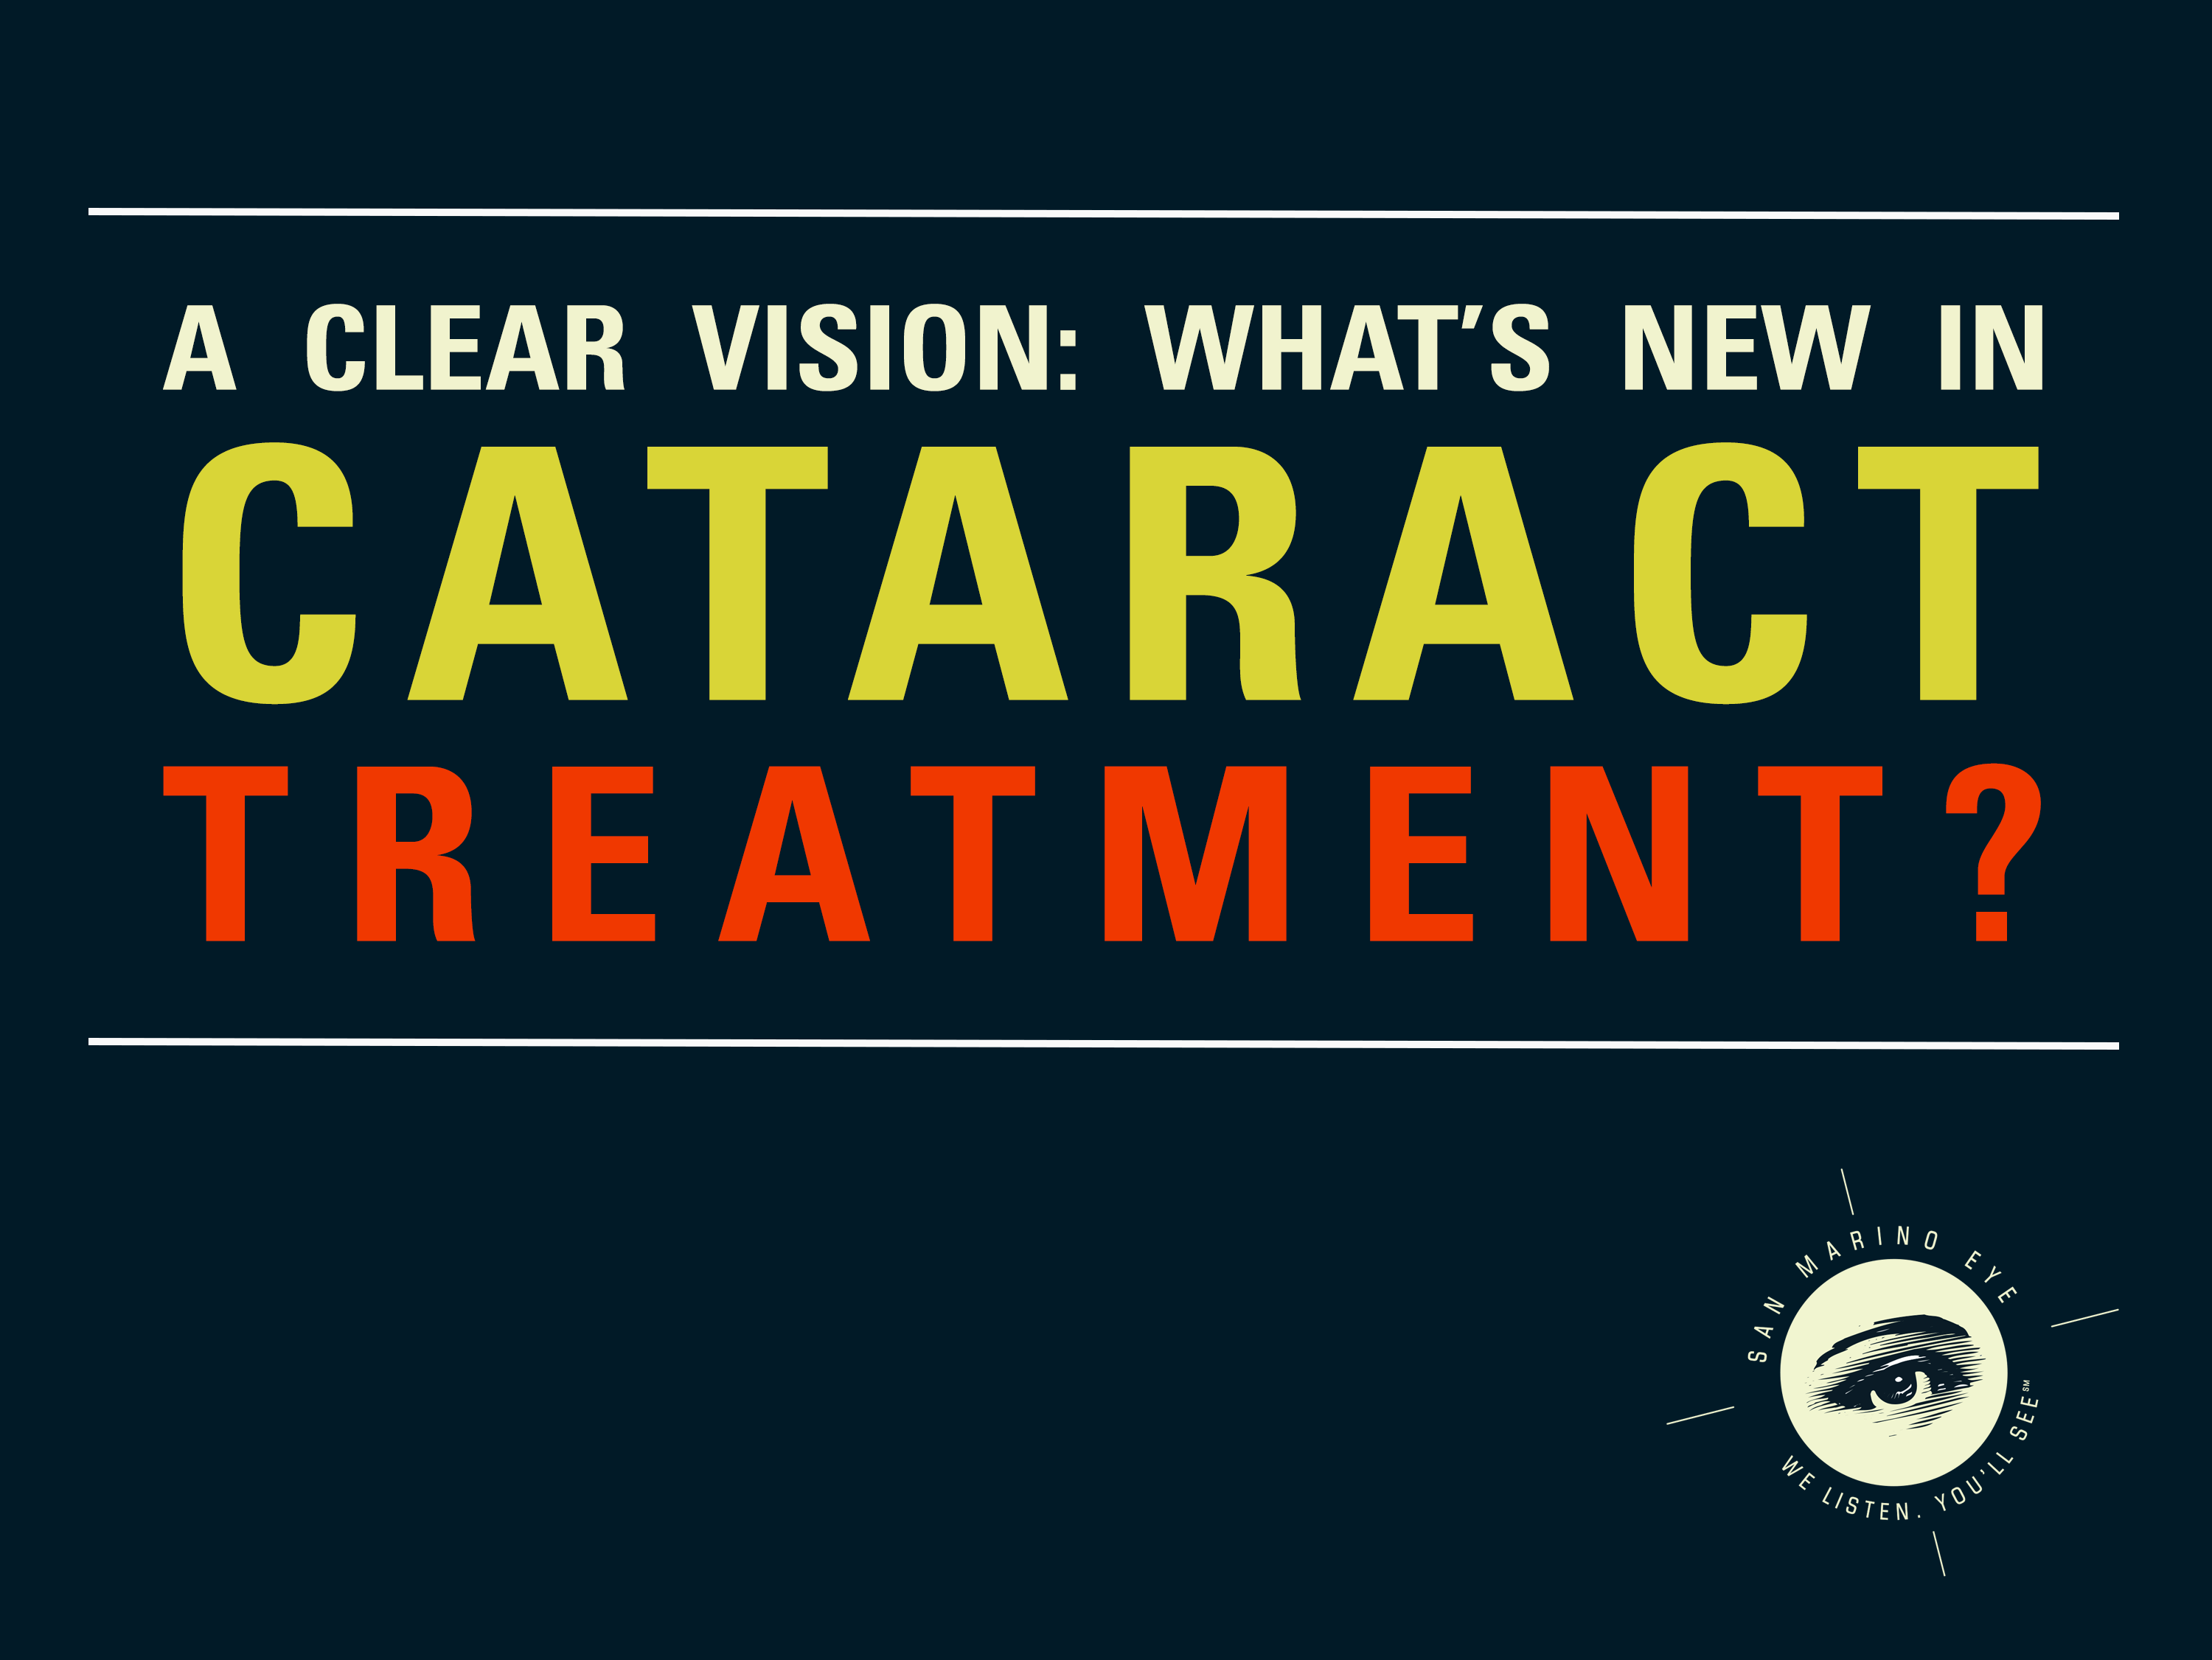 A-Clear-Vision-Whats-New-in-Cataract-Treatment